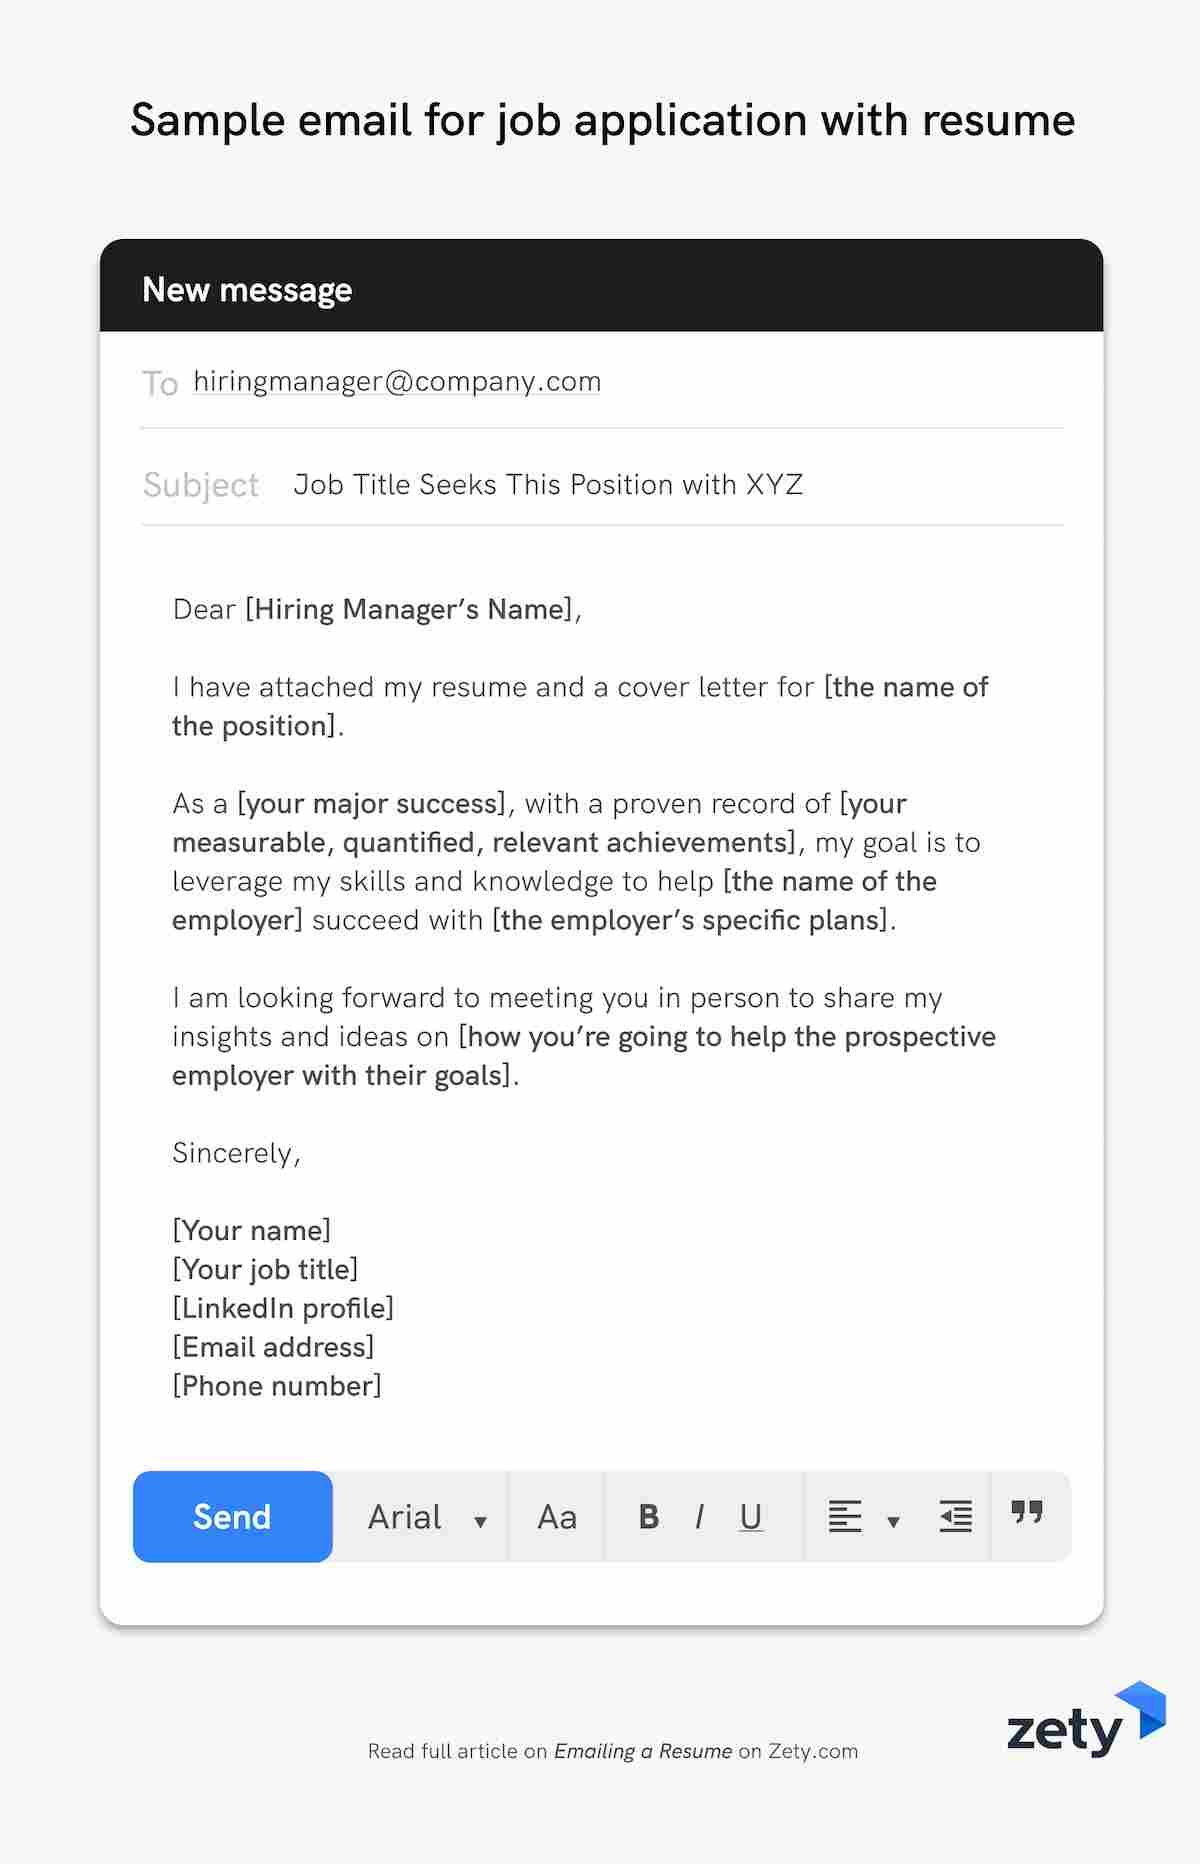 Sample Email to Send Resume for Job with Reference How to Email A Resume and Cover Letter to An Employer